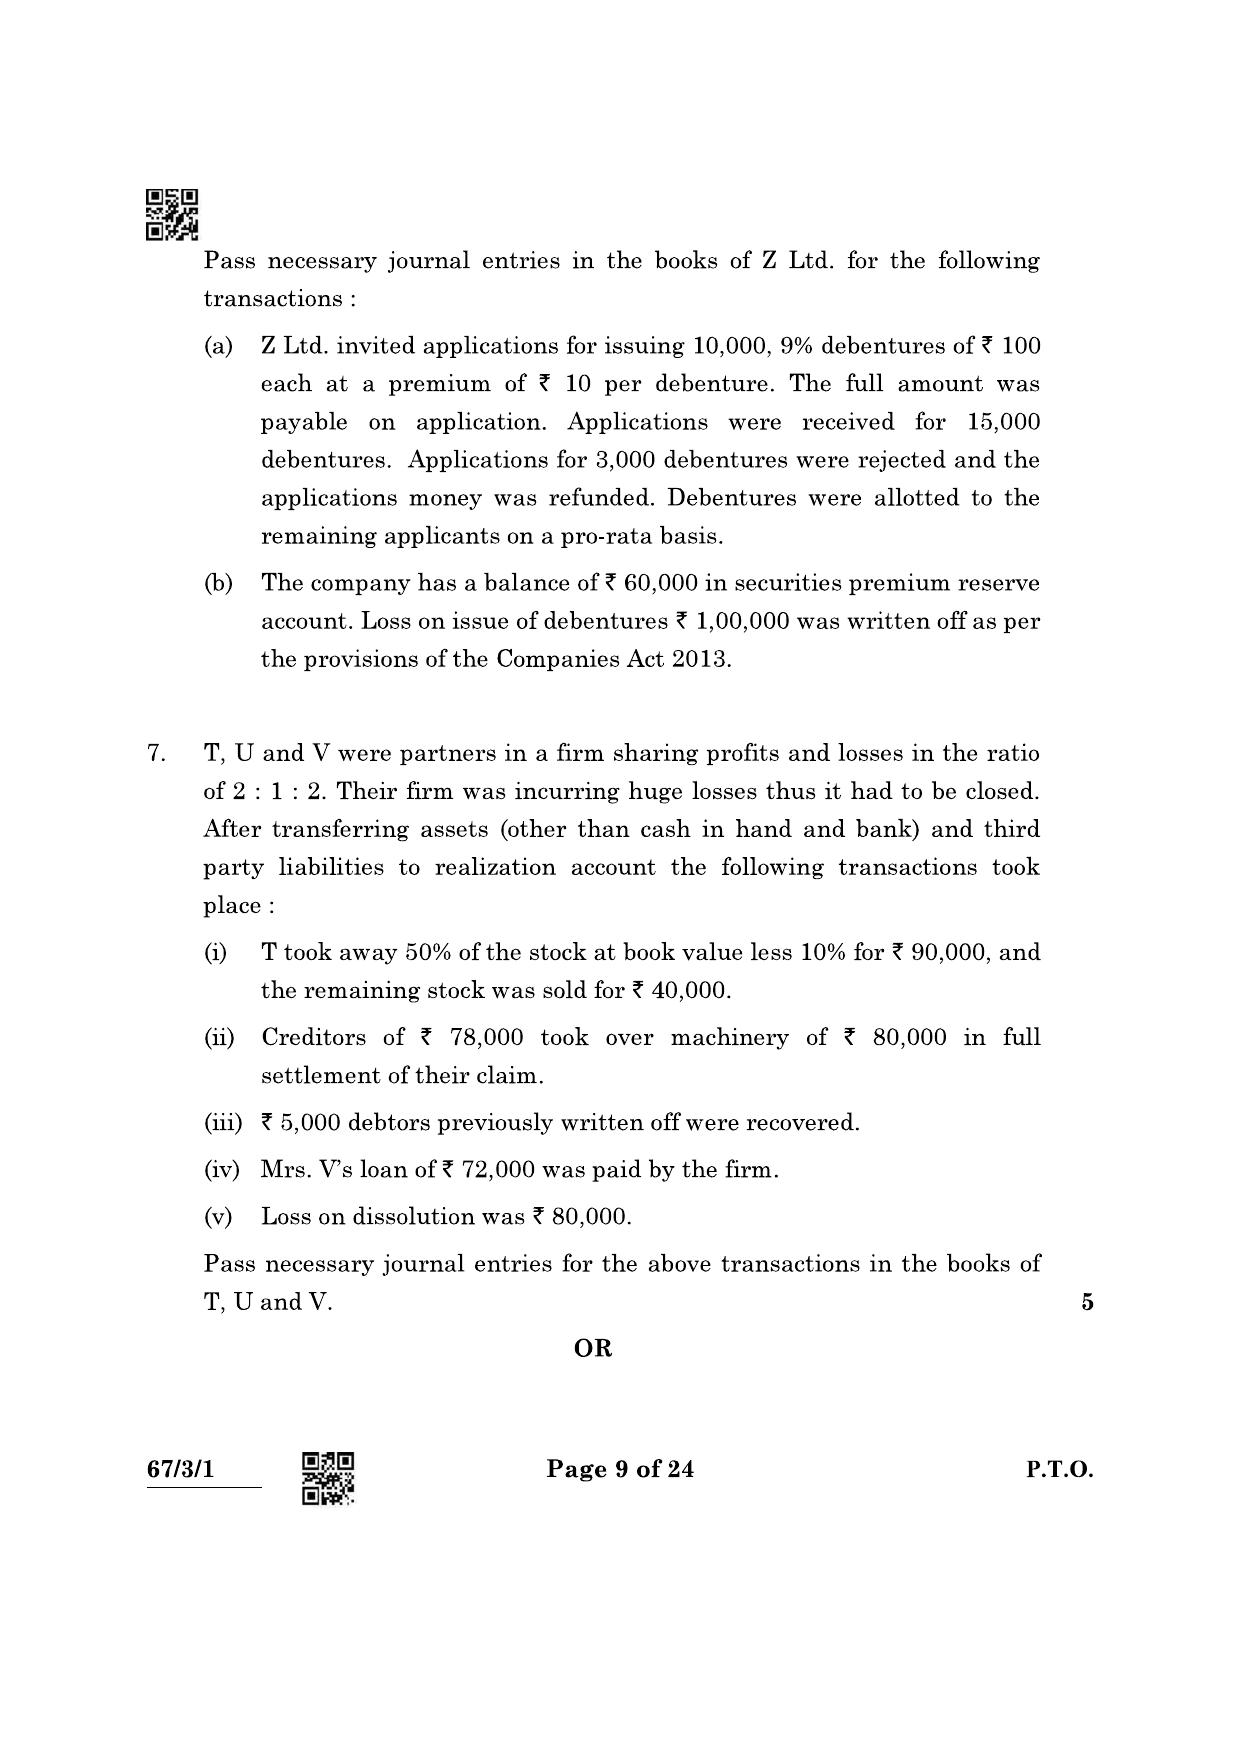 CBSE Class 12 67-3-1 Accountancy 2022 Question Paper - Page 9